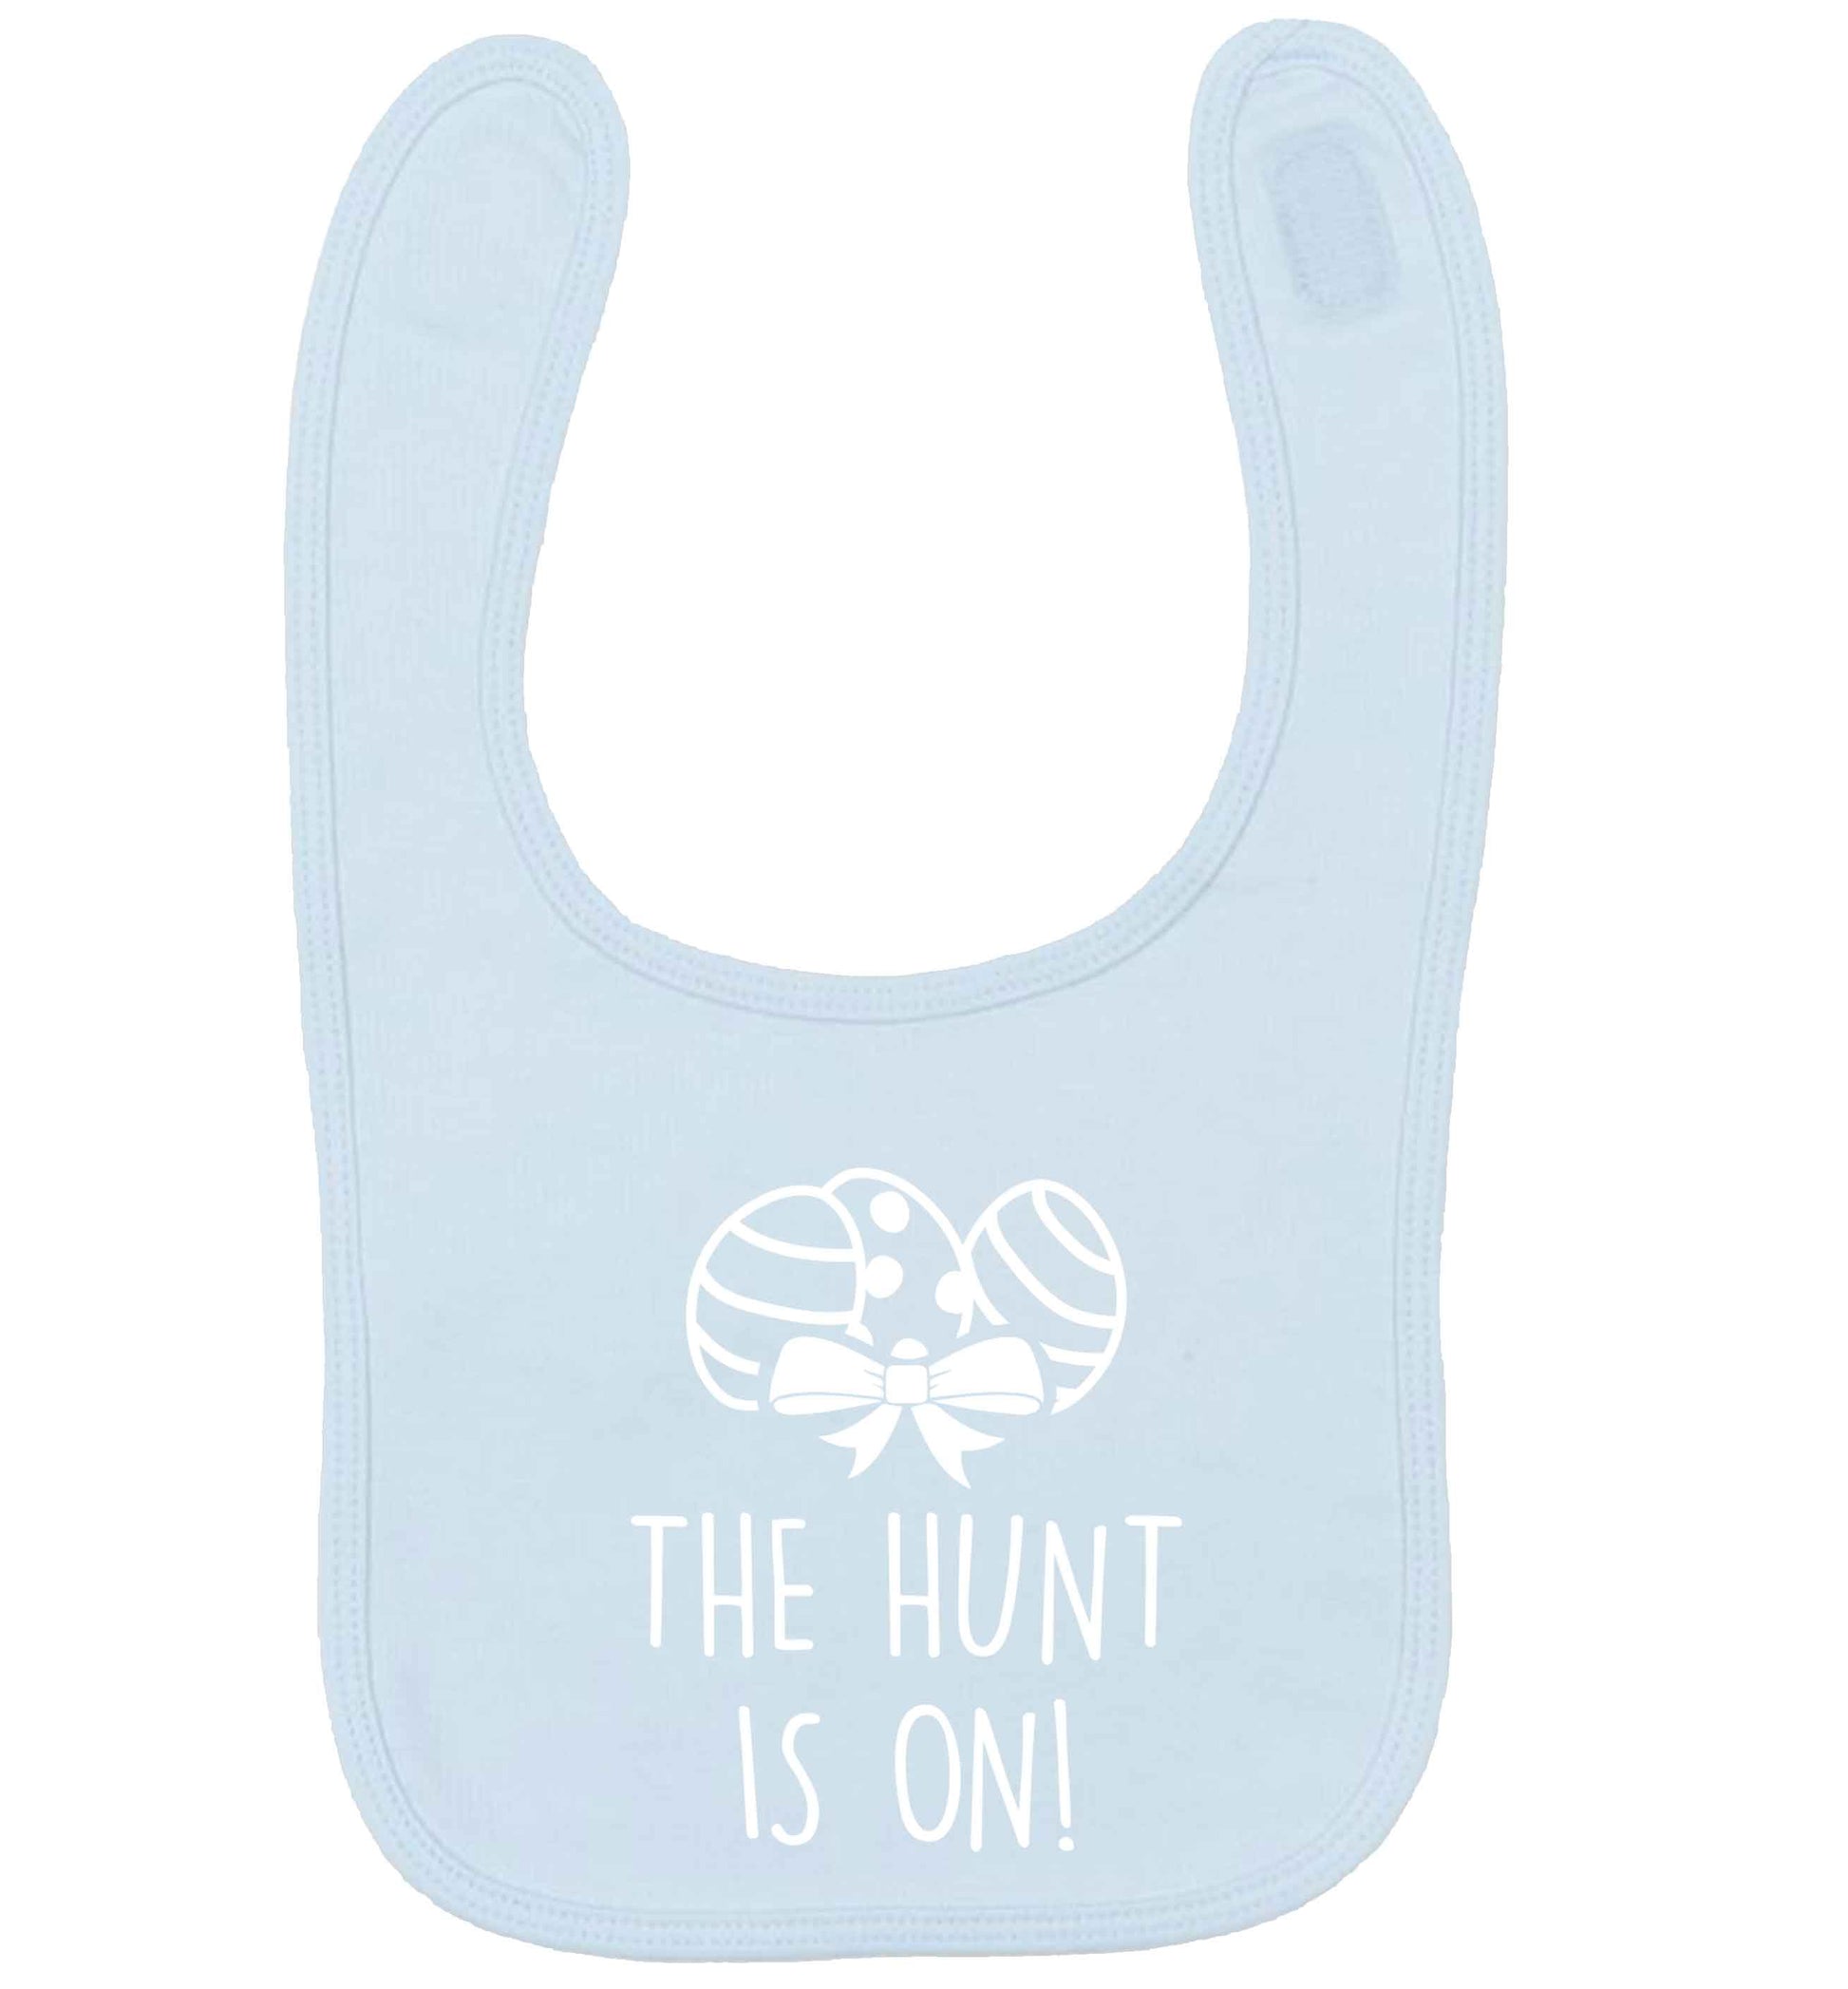 The hunt is on pale blue baby bib